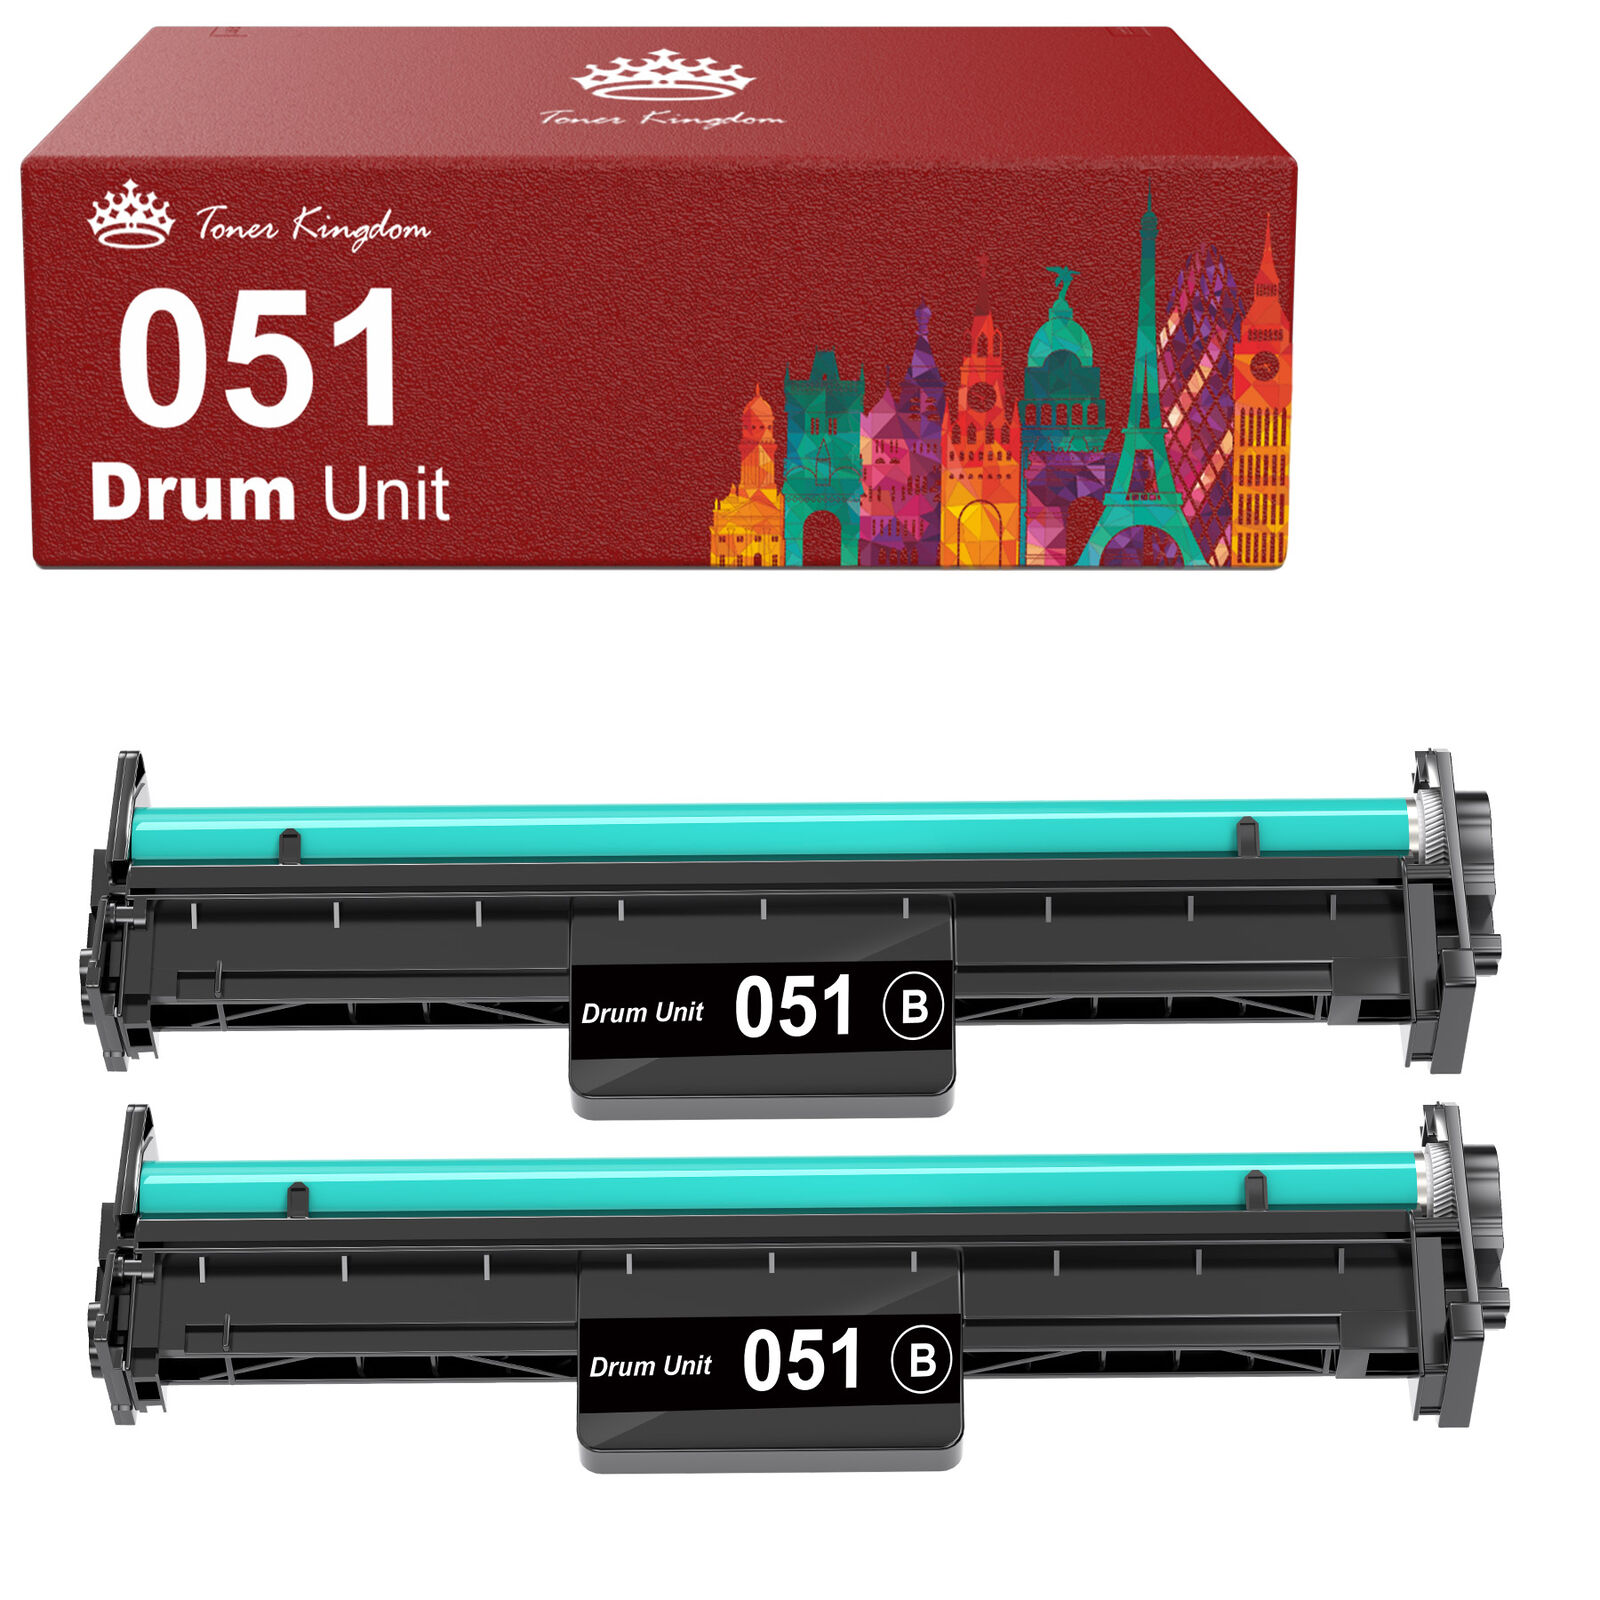 2PK Drum replacement for Canon 051 ImageCLASS MF267ic MF269dw MF263dn MF264dw